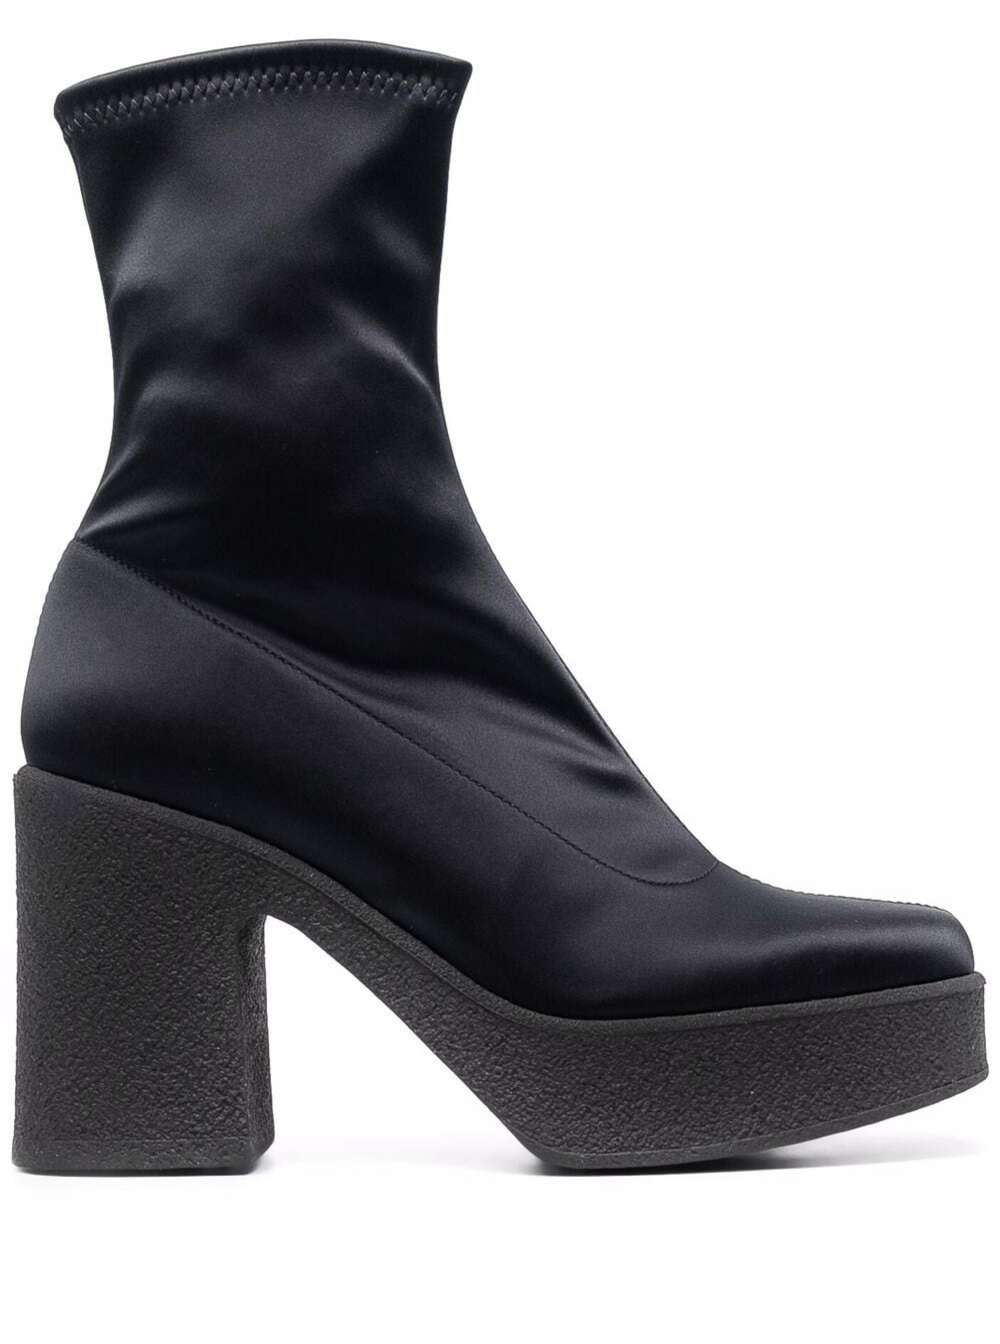 Pollini Black Fabric Ankle Boots With Square Toe